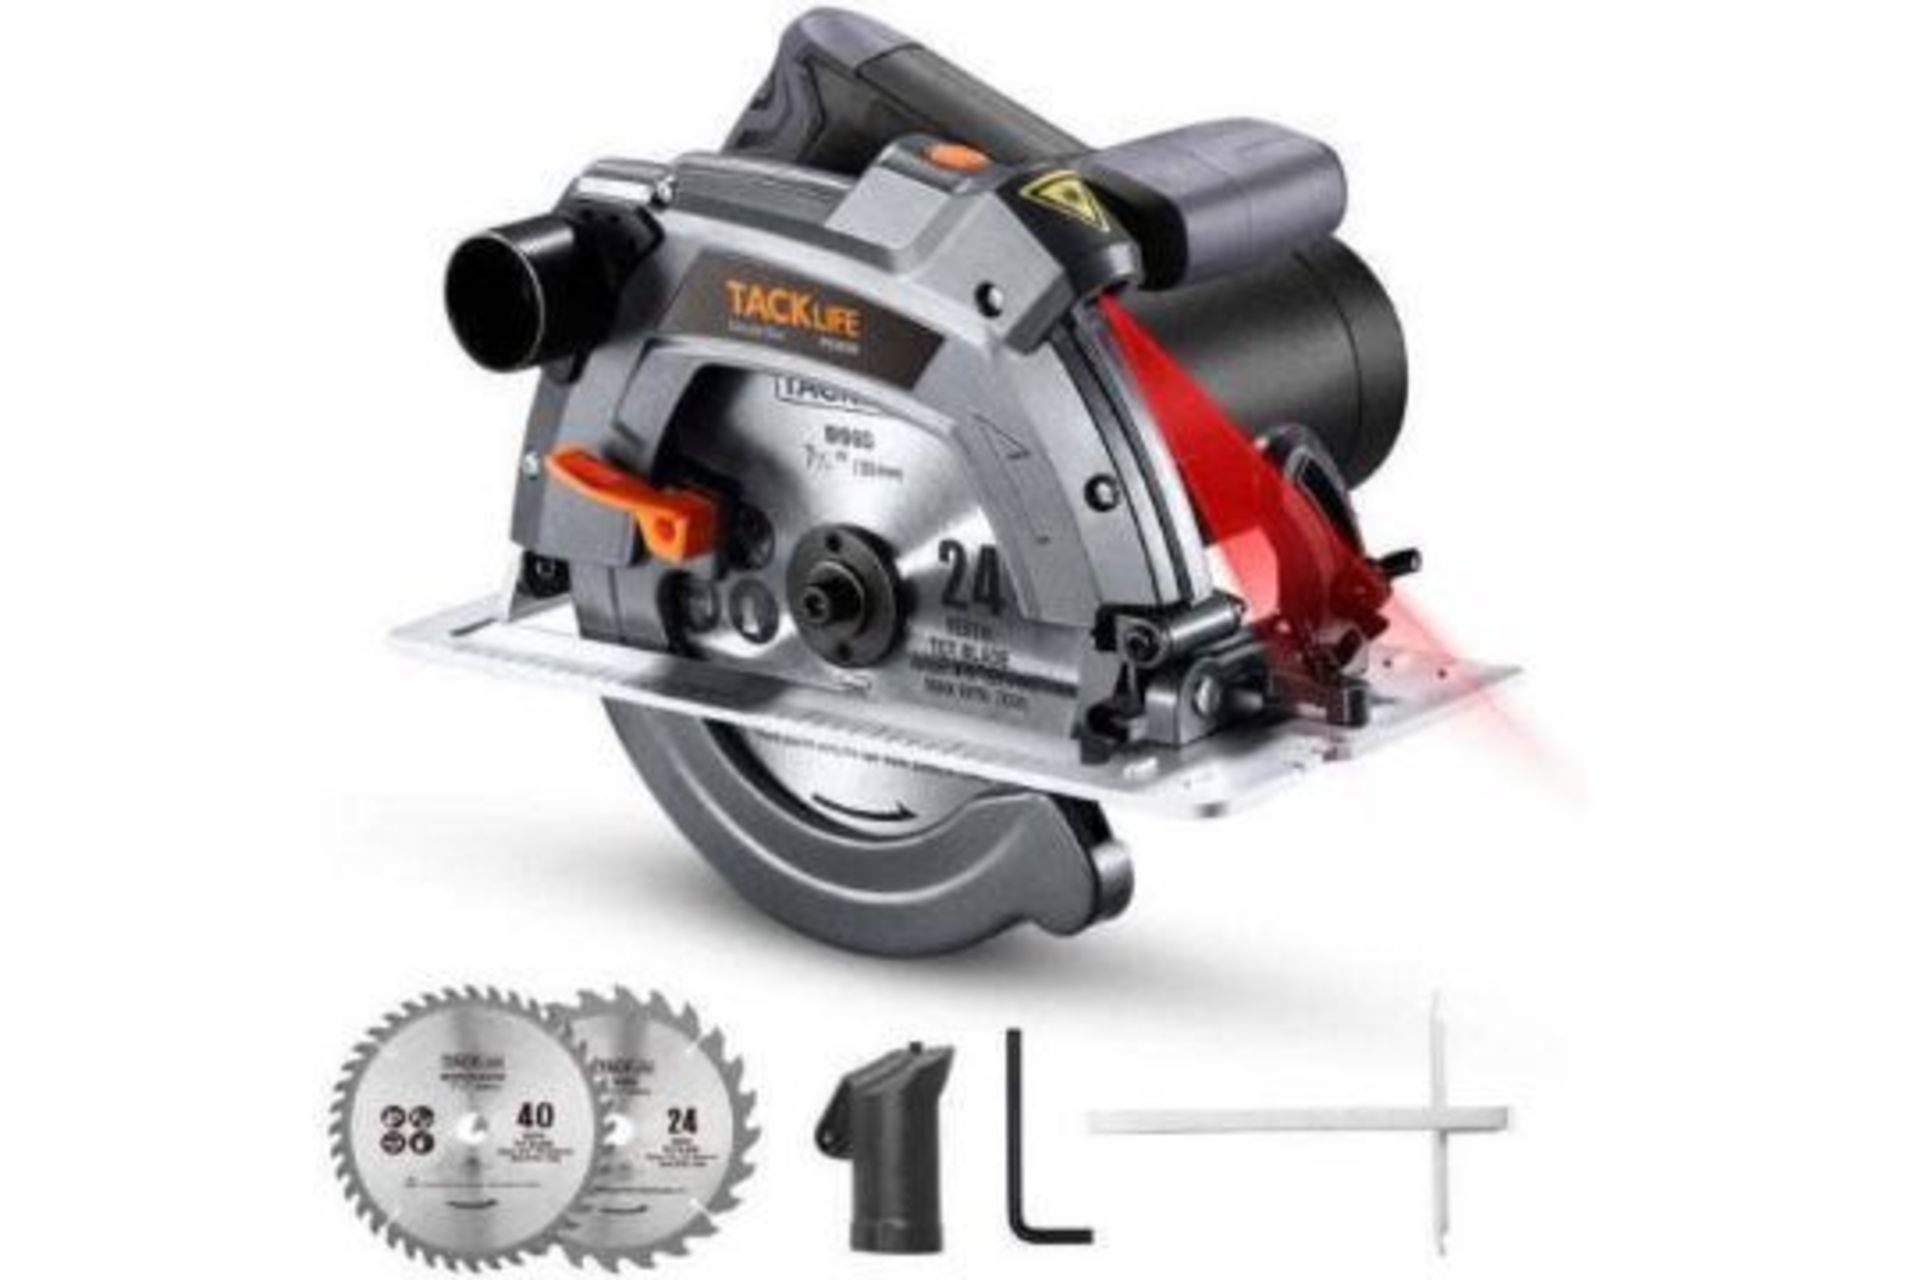 NEW BOXED TACKLIFE Electric Circular Saw,1500W, 5000 RPM With Bevel Cuts 2-3/5''. (ROW 12)